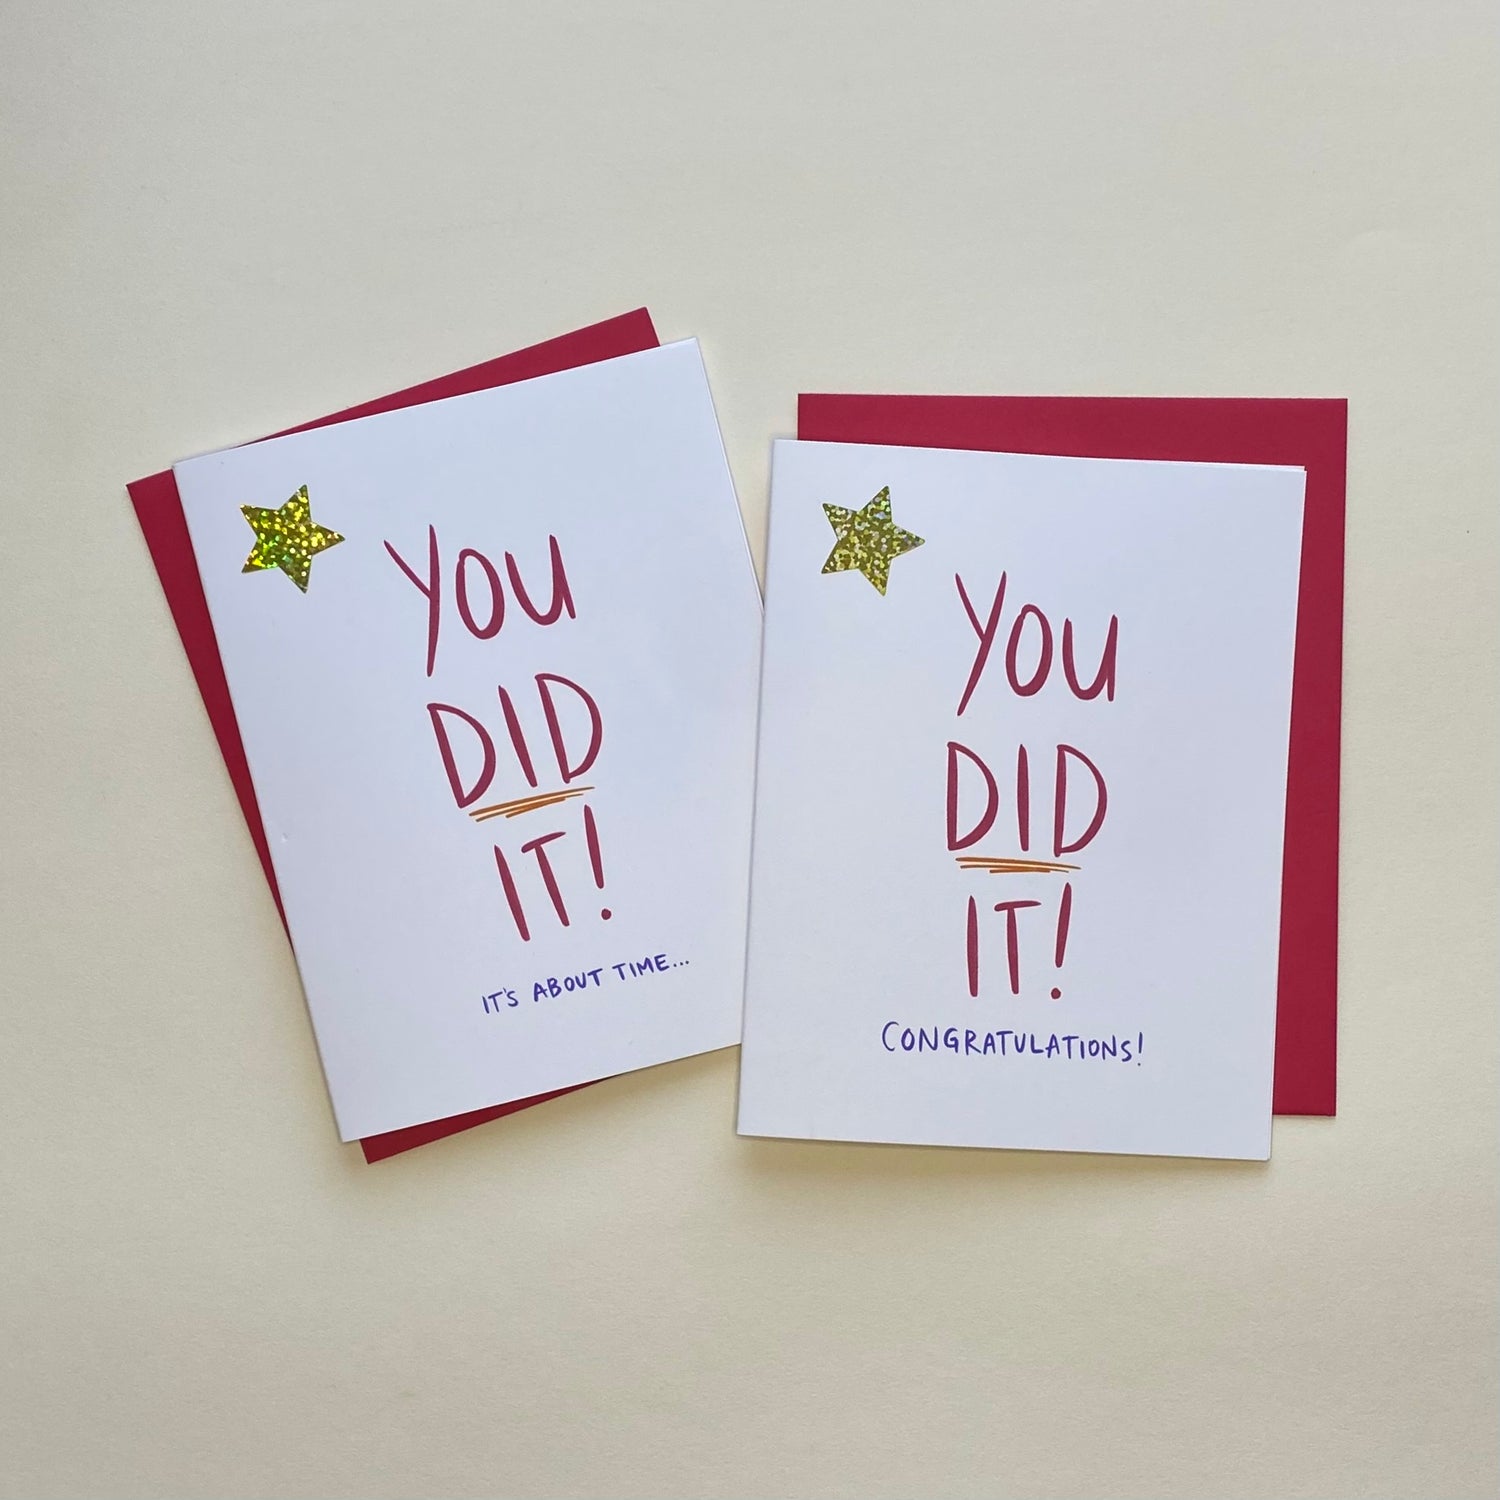 You did it!" sarcastic congratulations greeting card pair with gold star